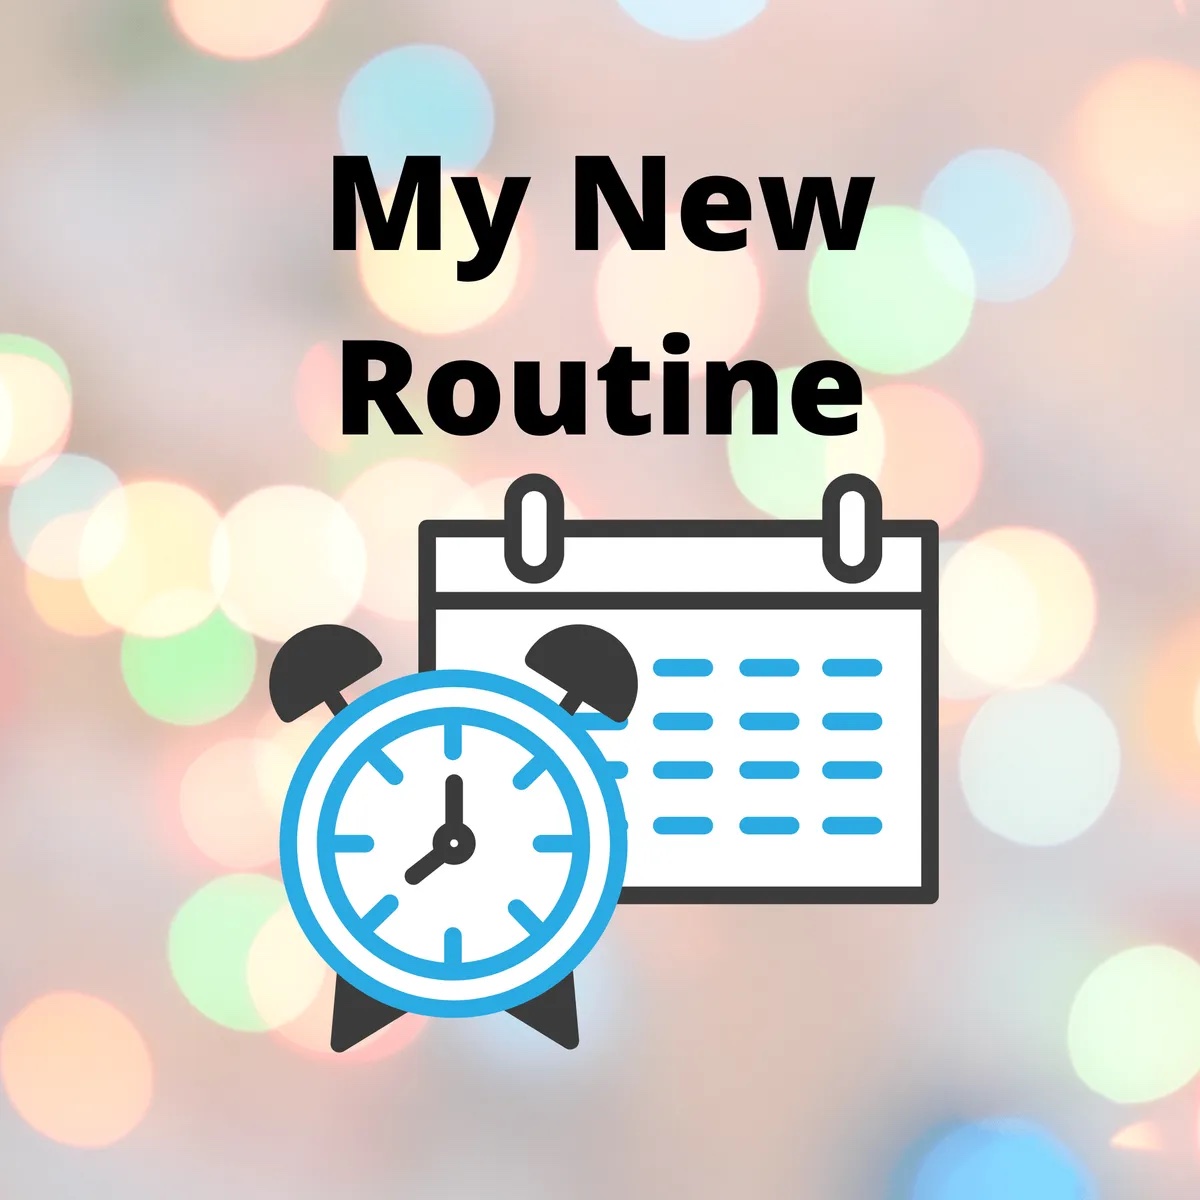 Keep your New Years Resolutions - My New Routine